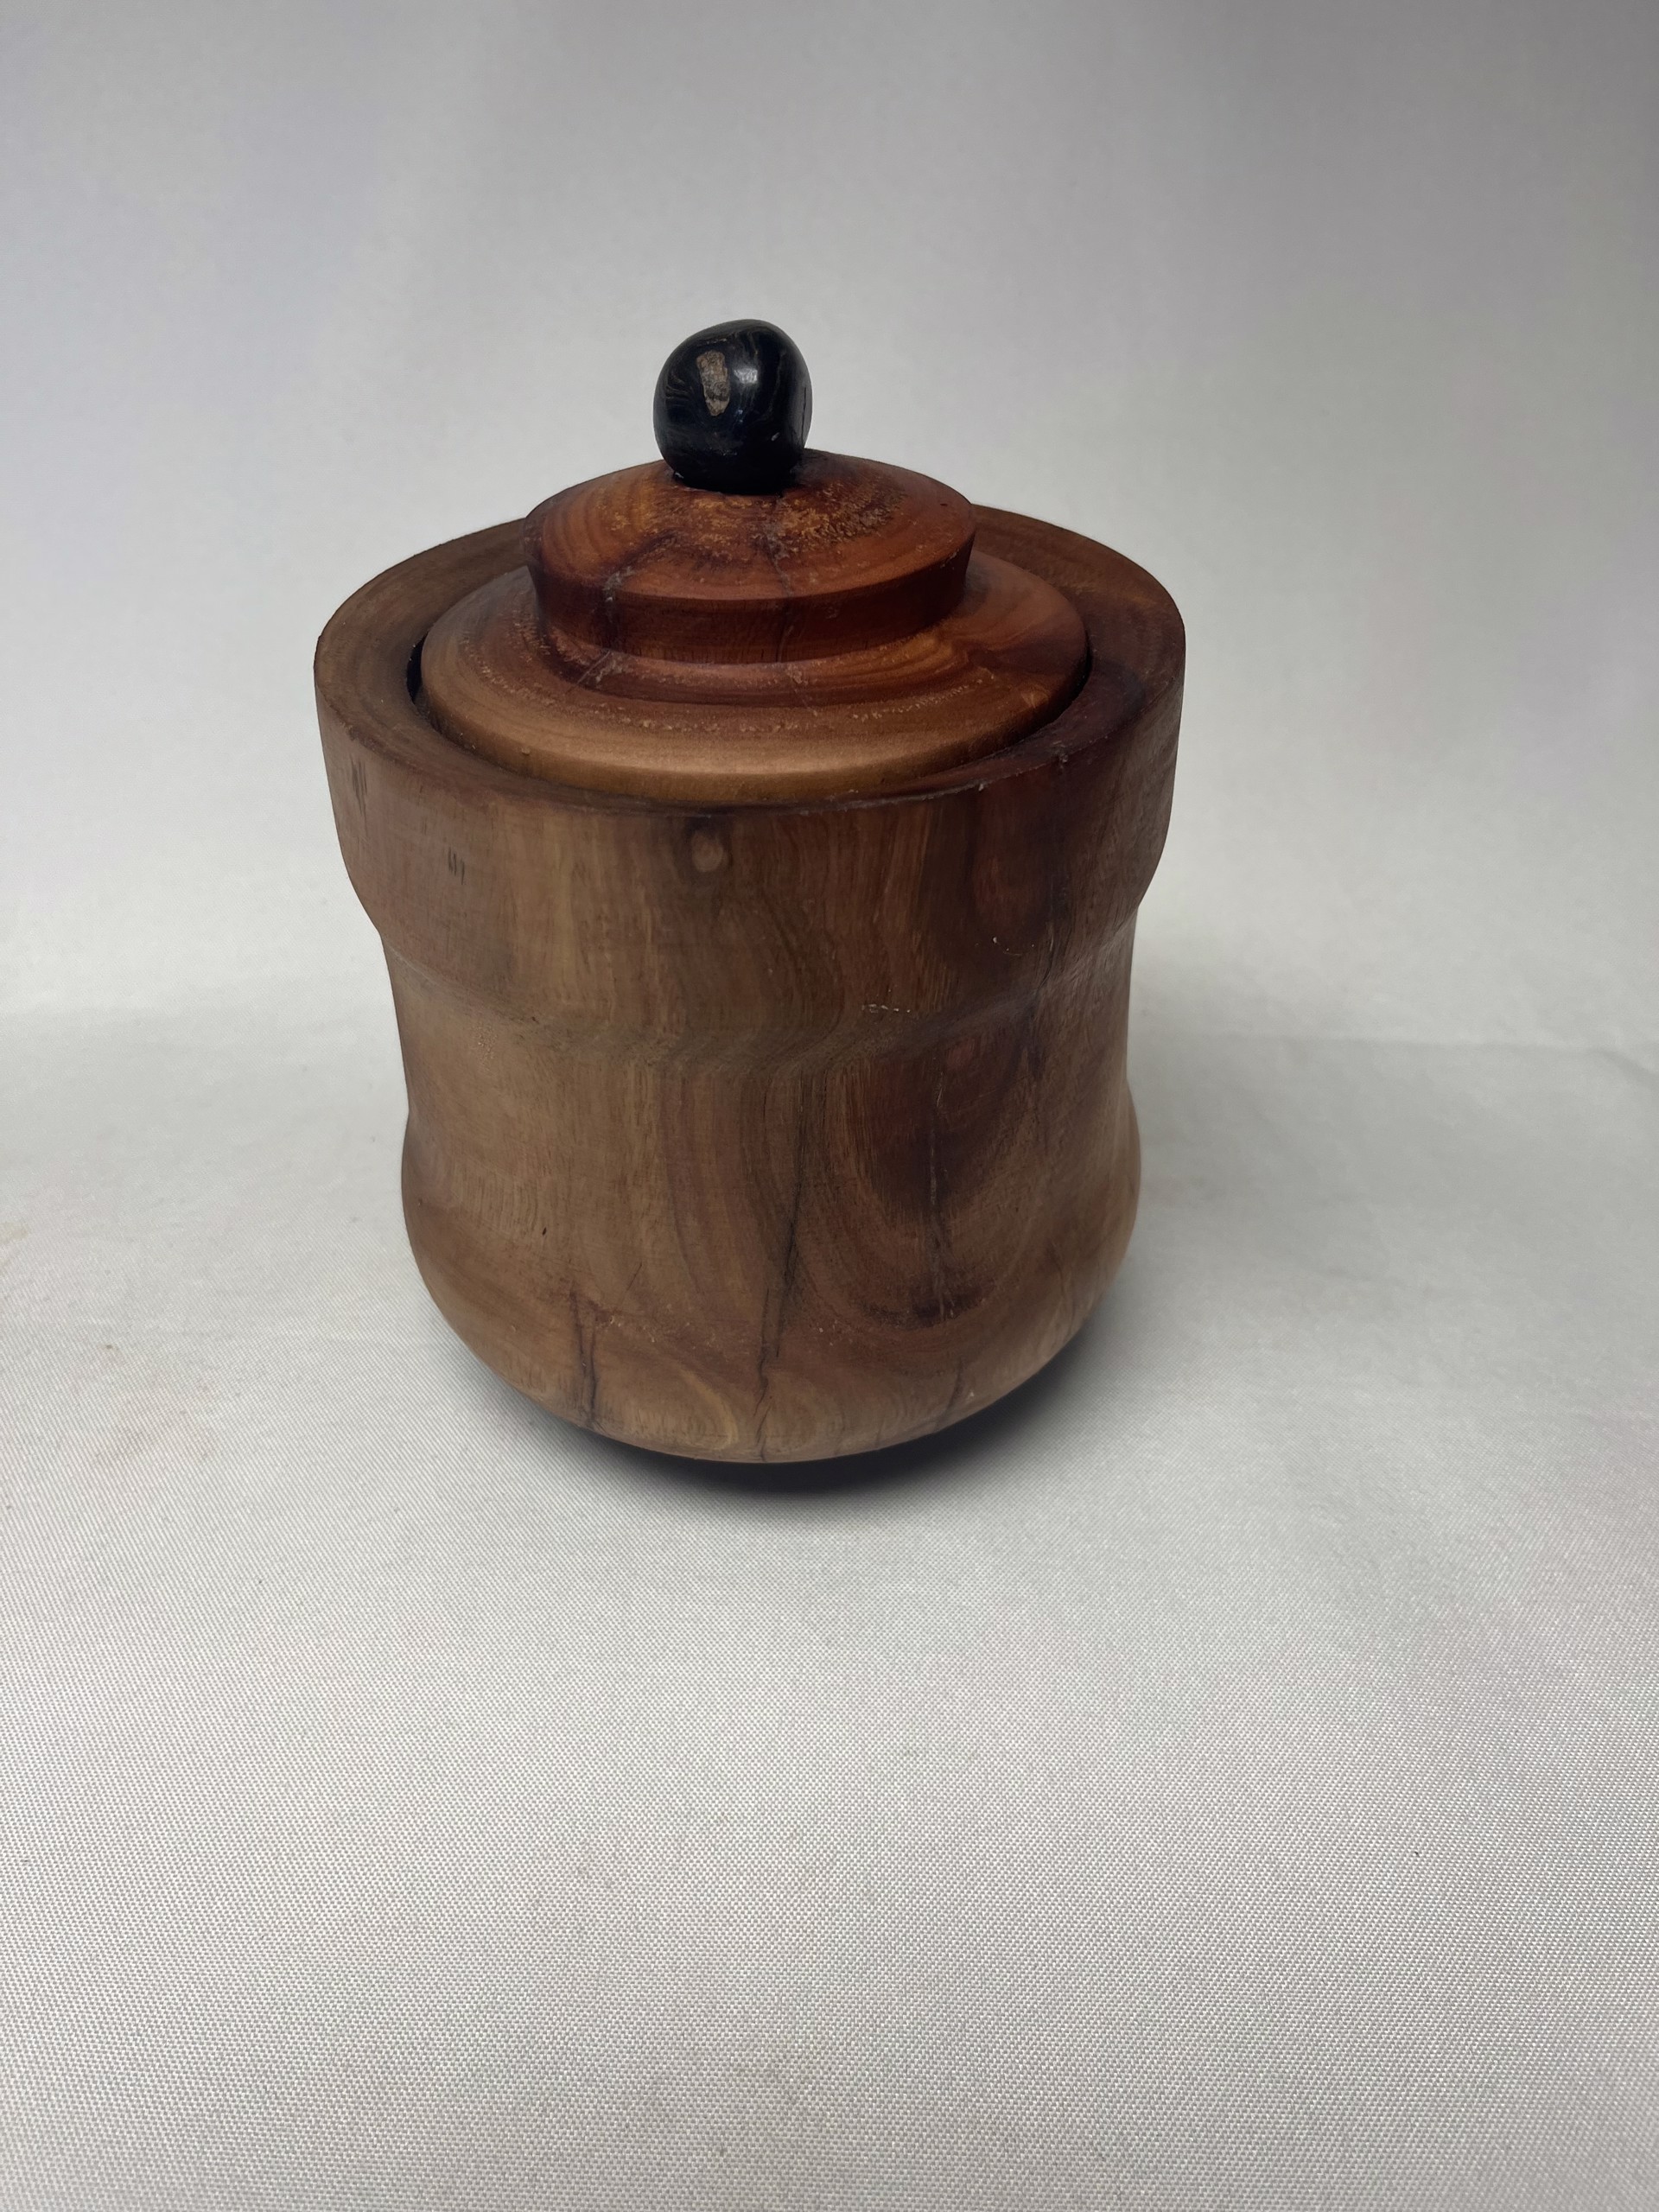 Turned Wood Jar W/Lid #22-80 by Rick Squires